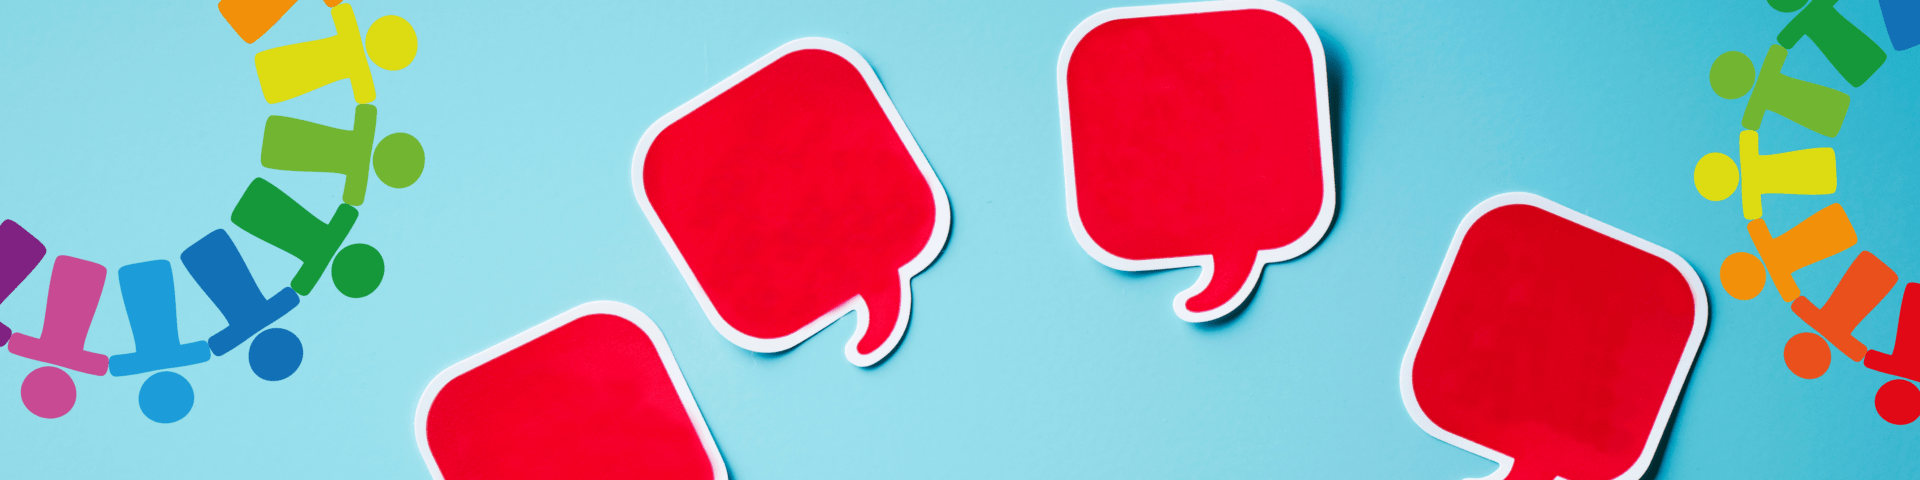 Blue background with four red speech bubbles